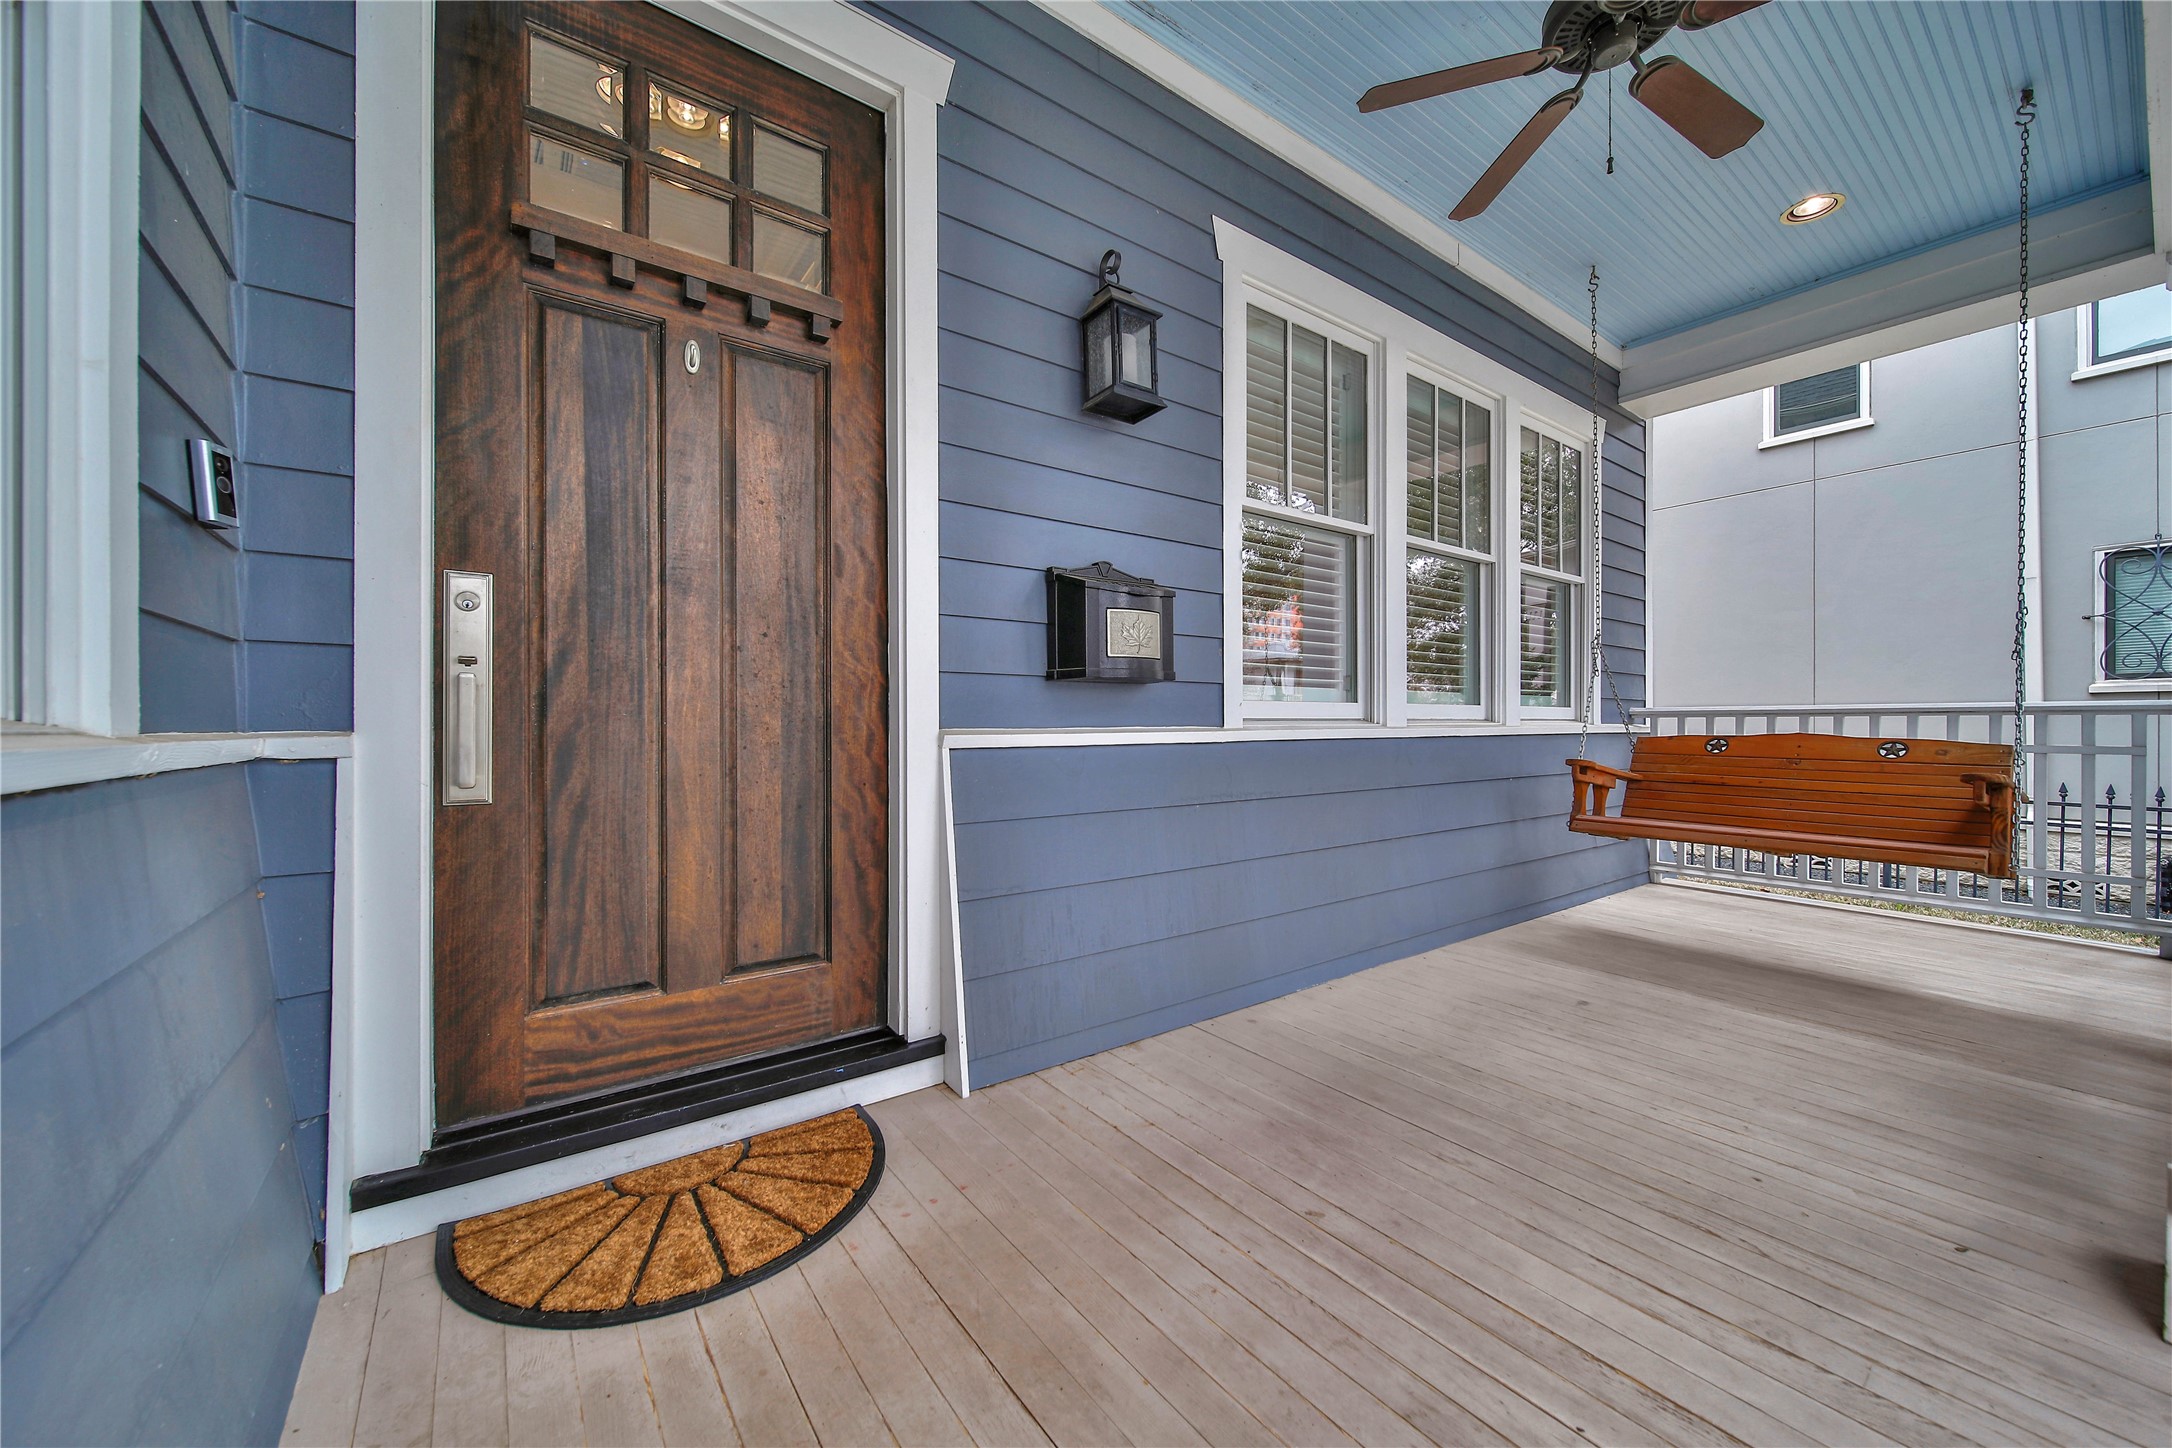 Spacious front porch with porch swing!